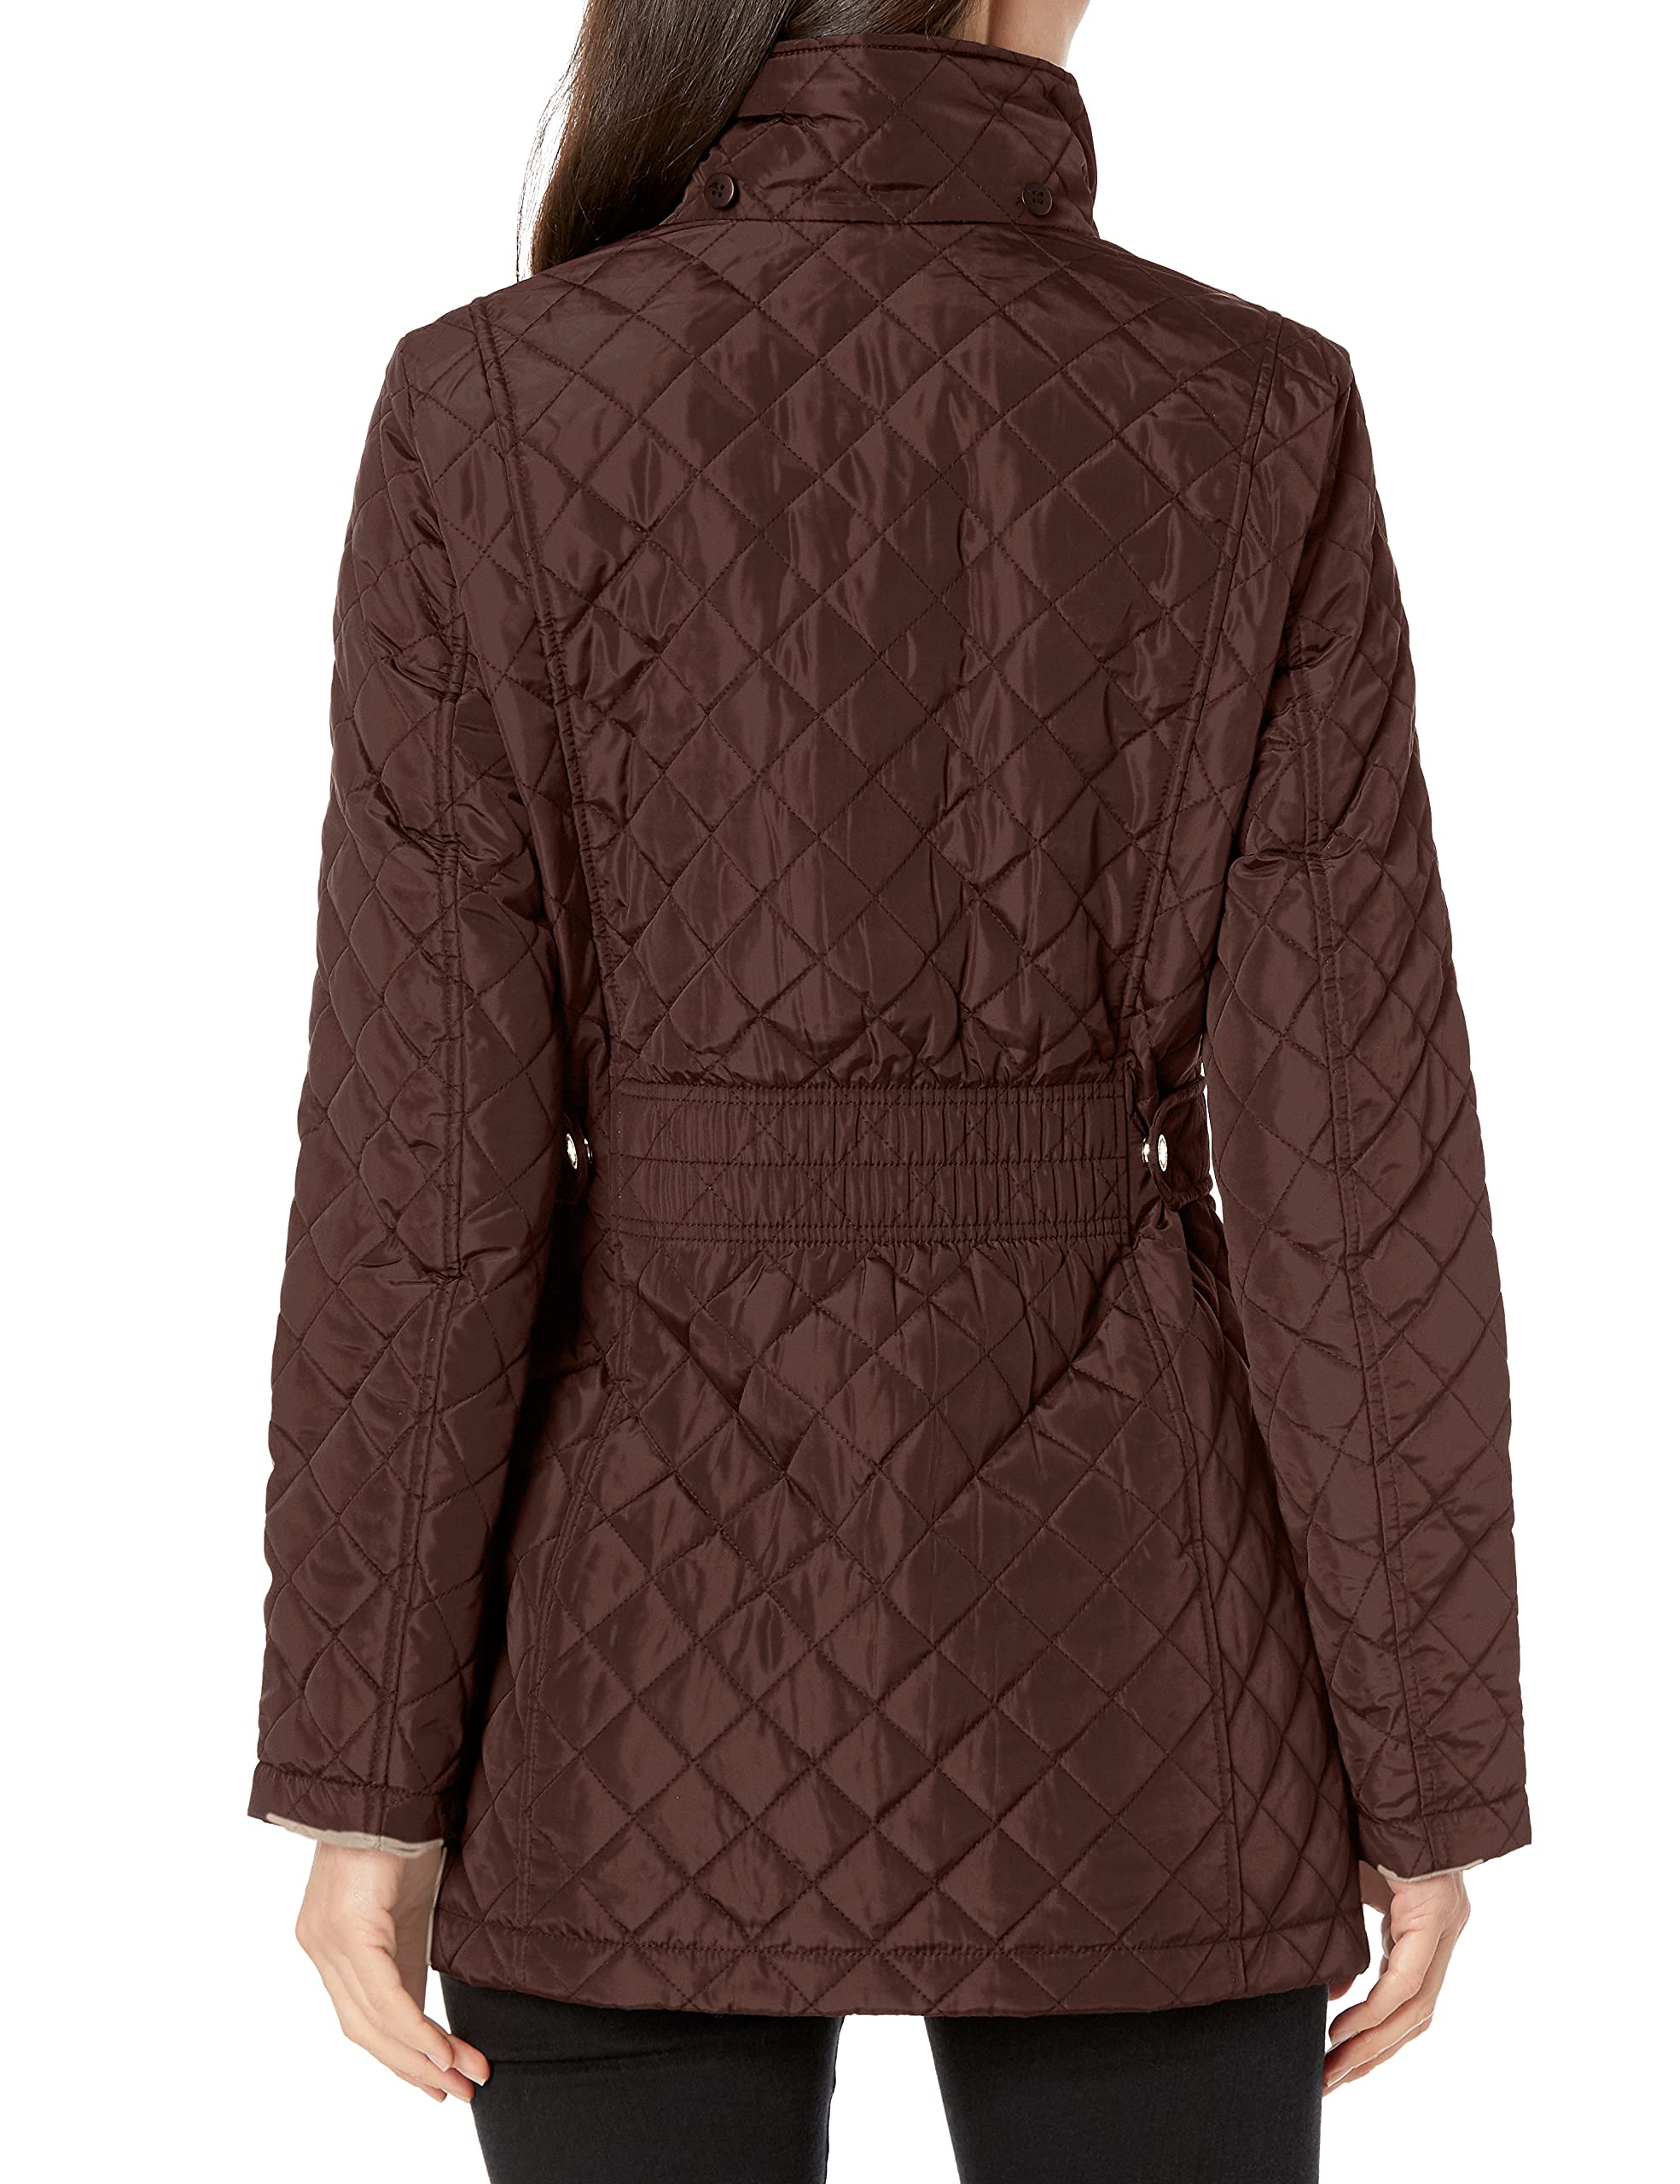 Calvin Klein Women's Mid-Weight Diamond Quilted Jacket (Standard and Plus)